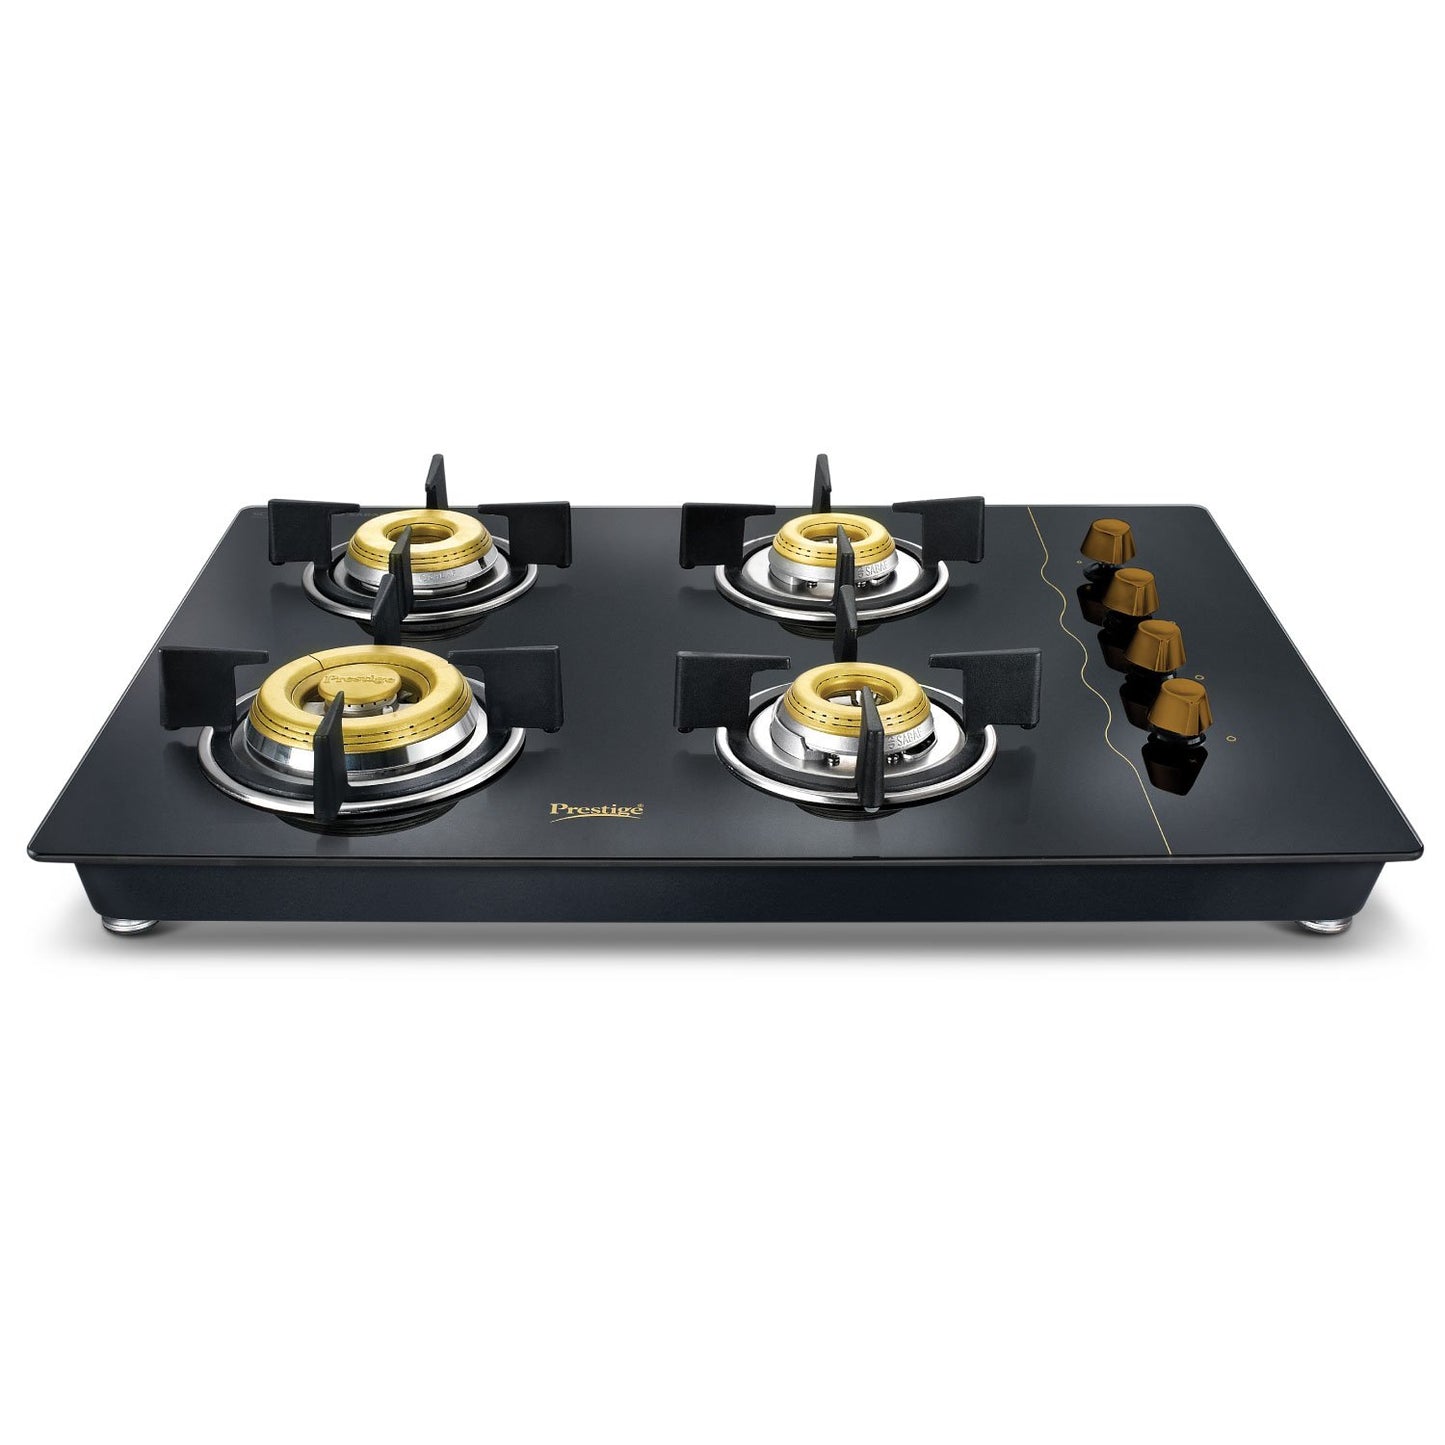 Prestige Gold Hobtop PHTG 04 AI Schott Glass Top Hob Gas Stove with One-Touch Advanced Auto-Ignition, 4 Burner